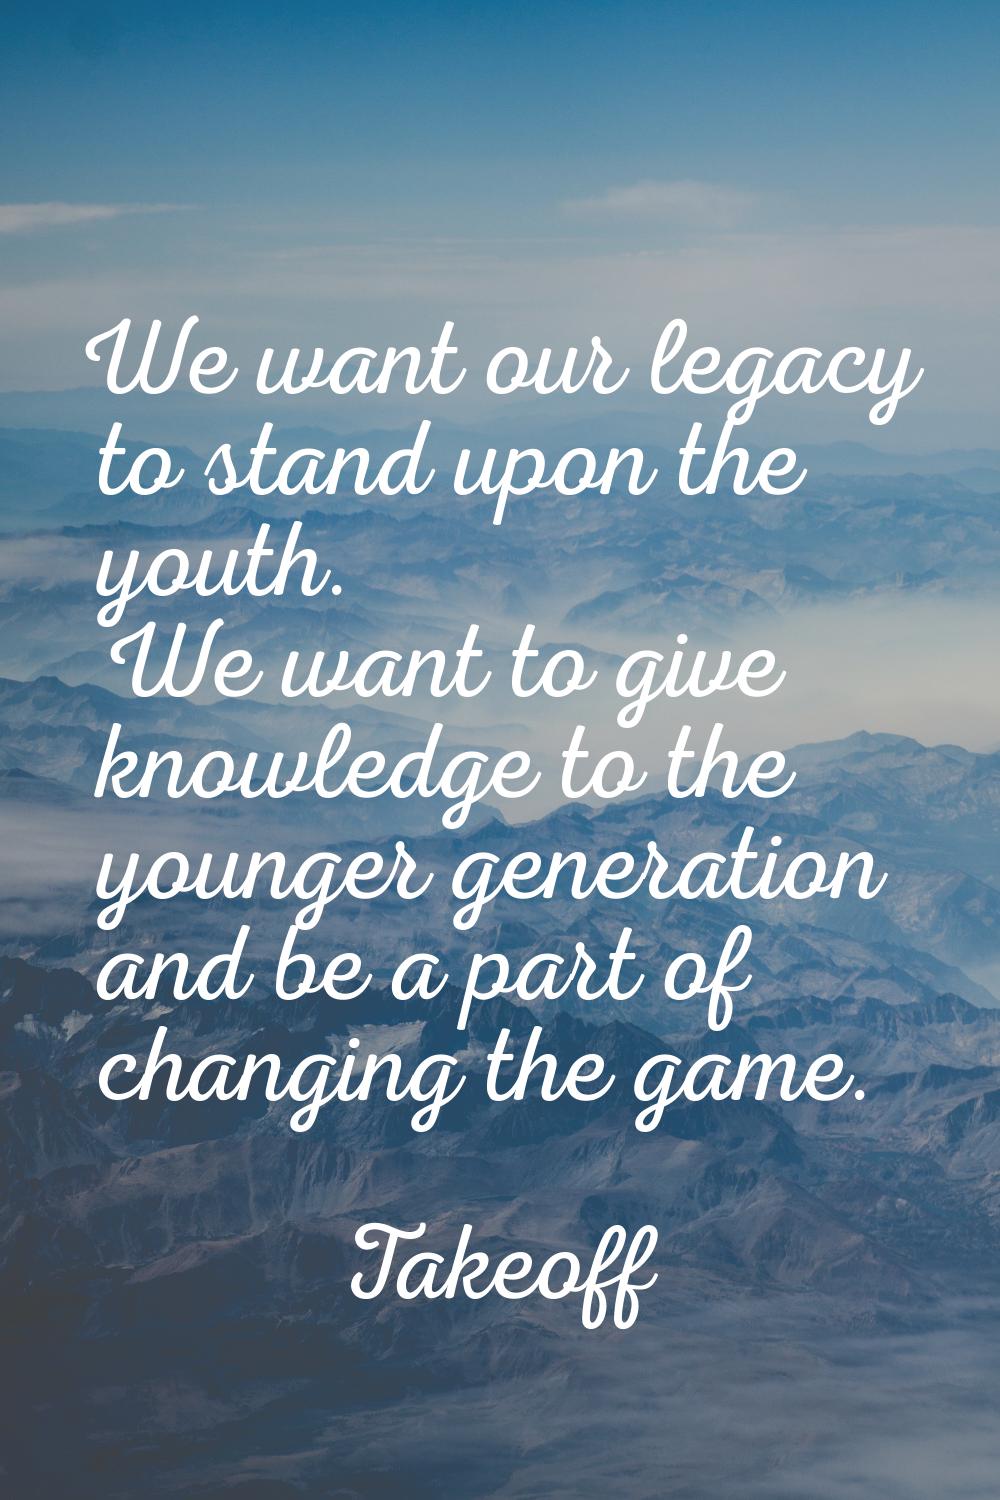 We want our legacy to stand upon the youth. We want to give knowledge to the younger generation and